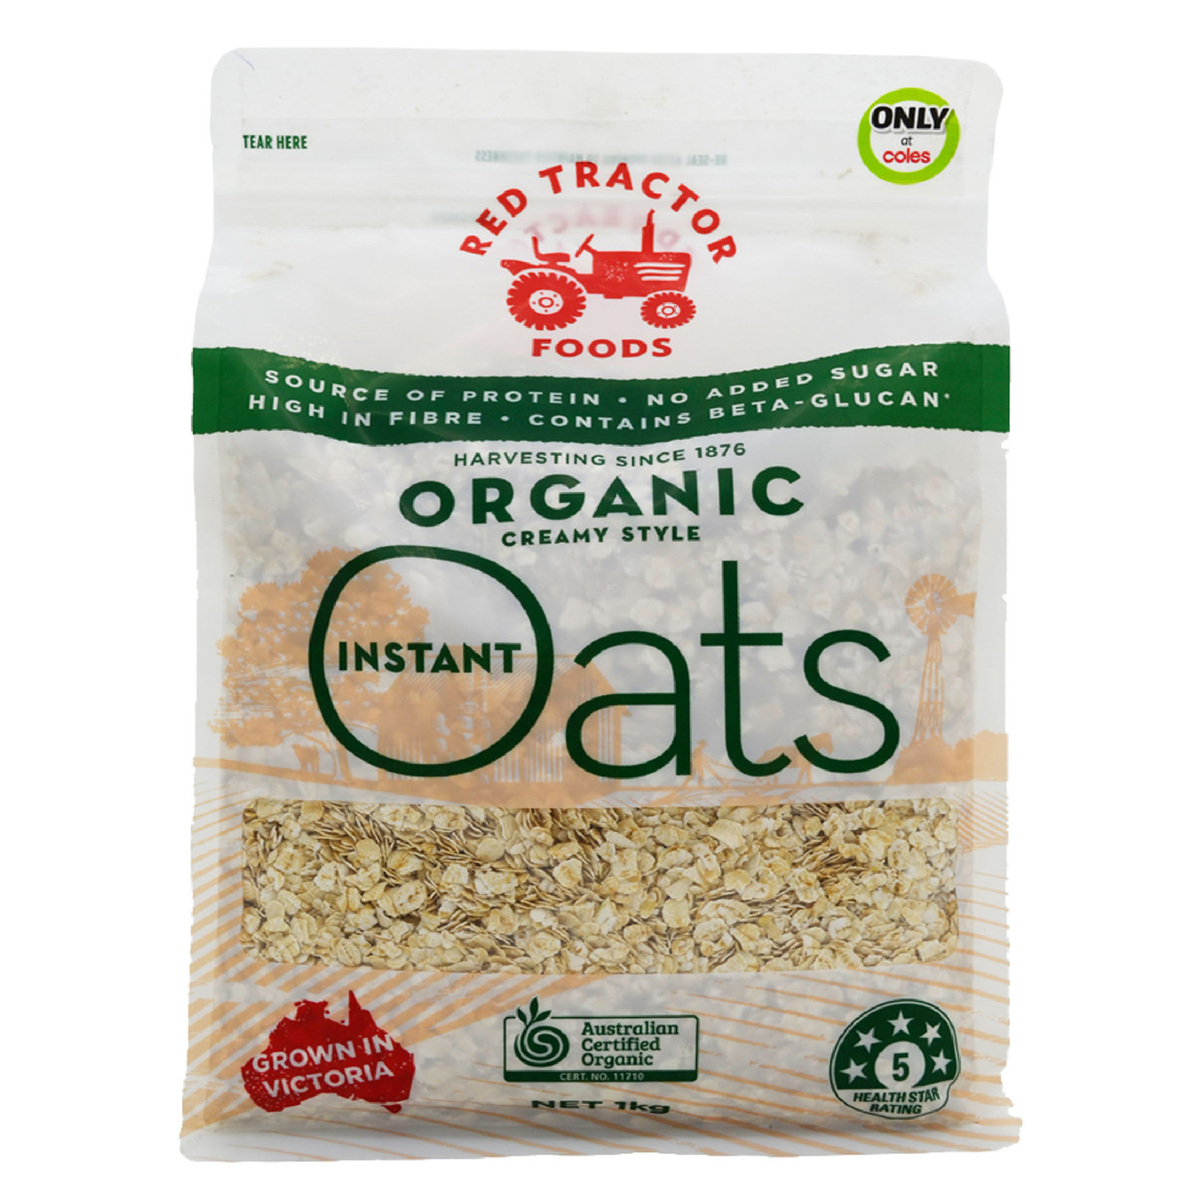 Red Tractor Organic Instant Oats 1 kg